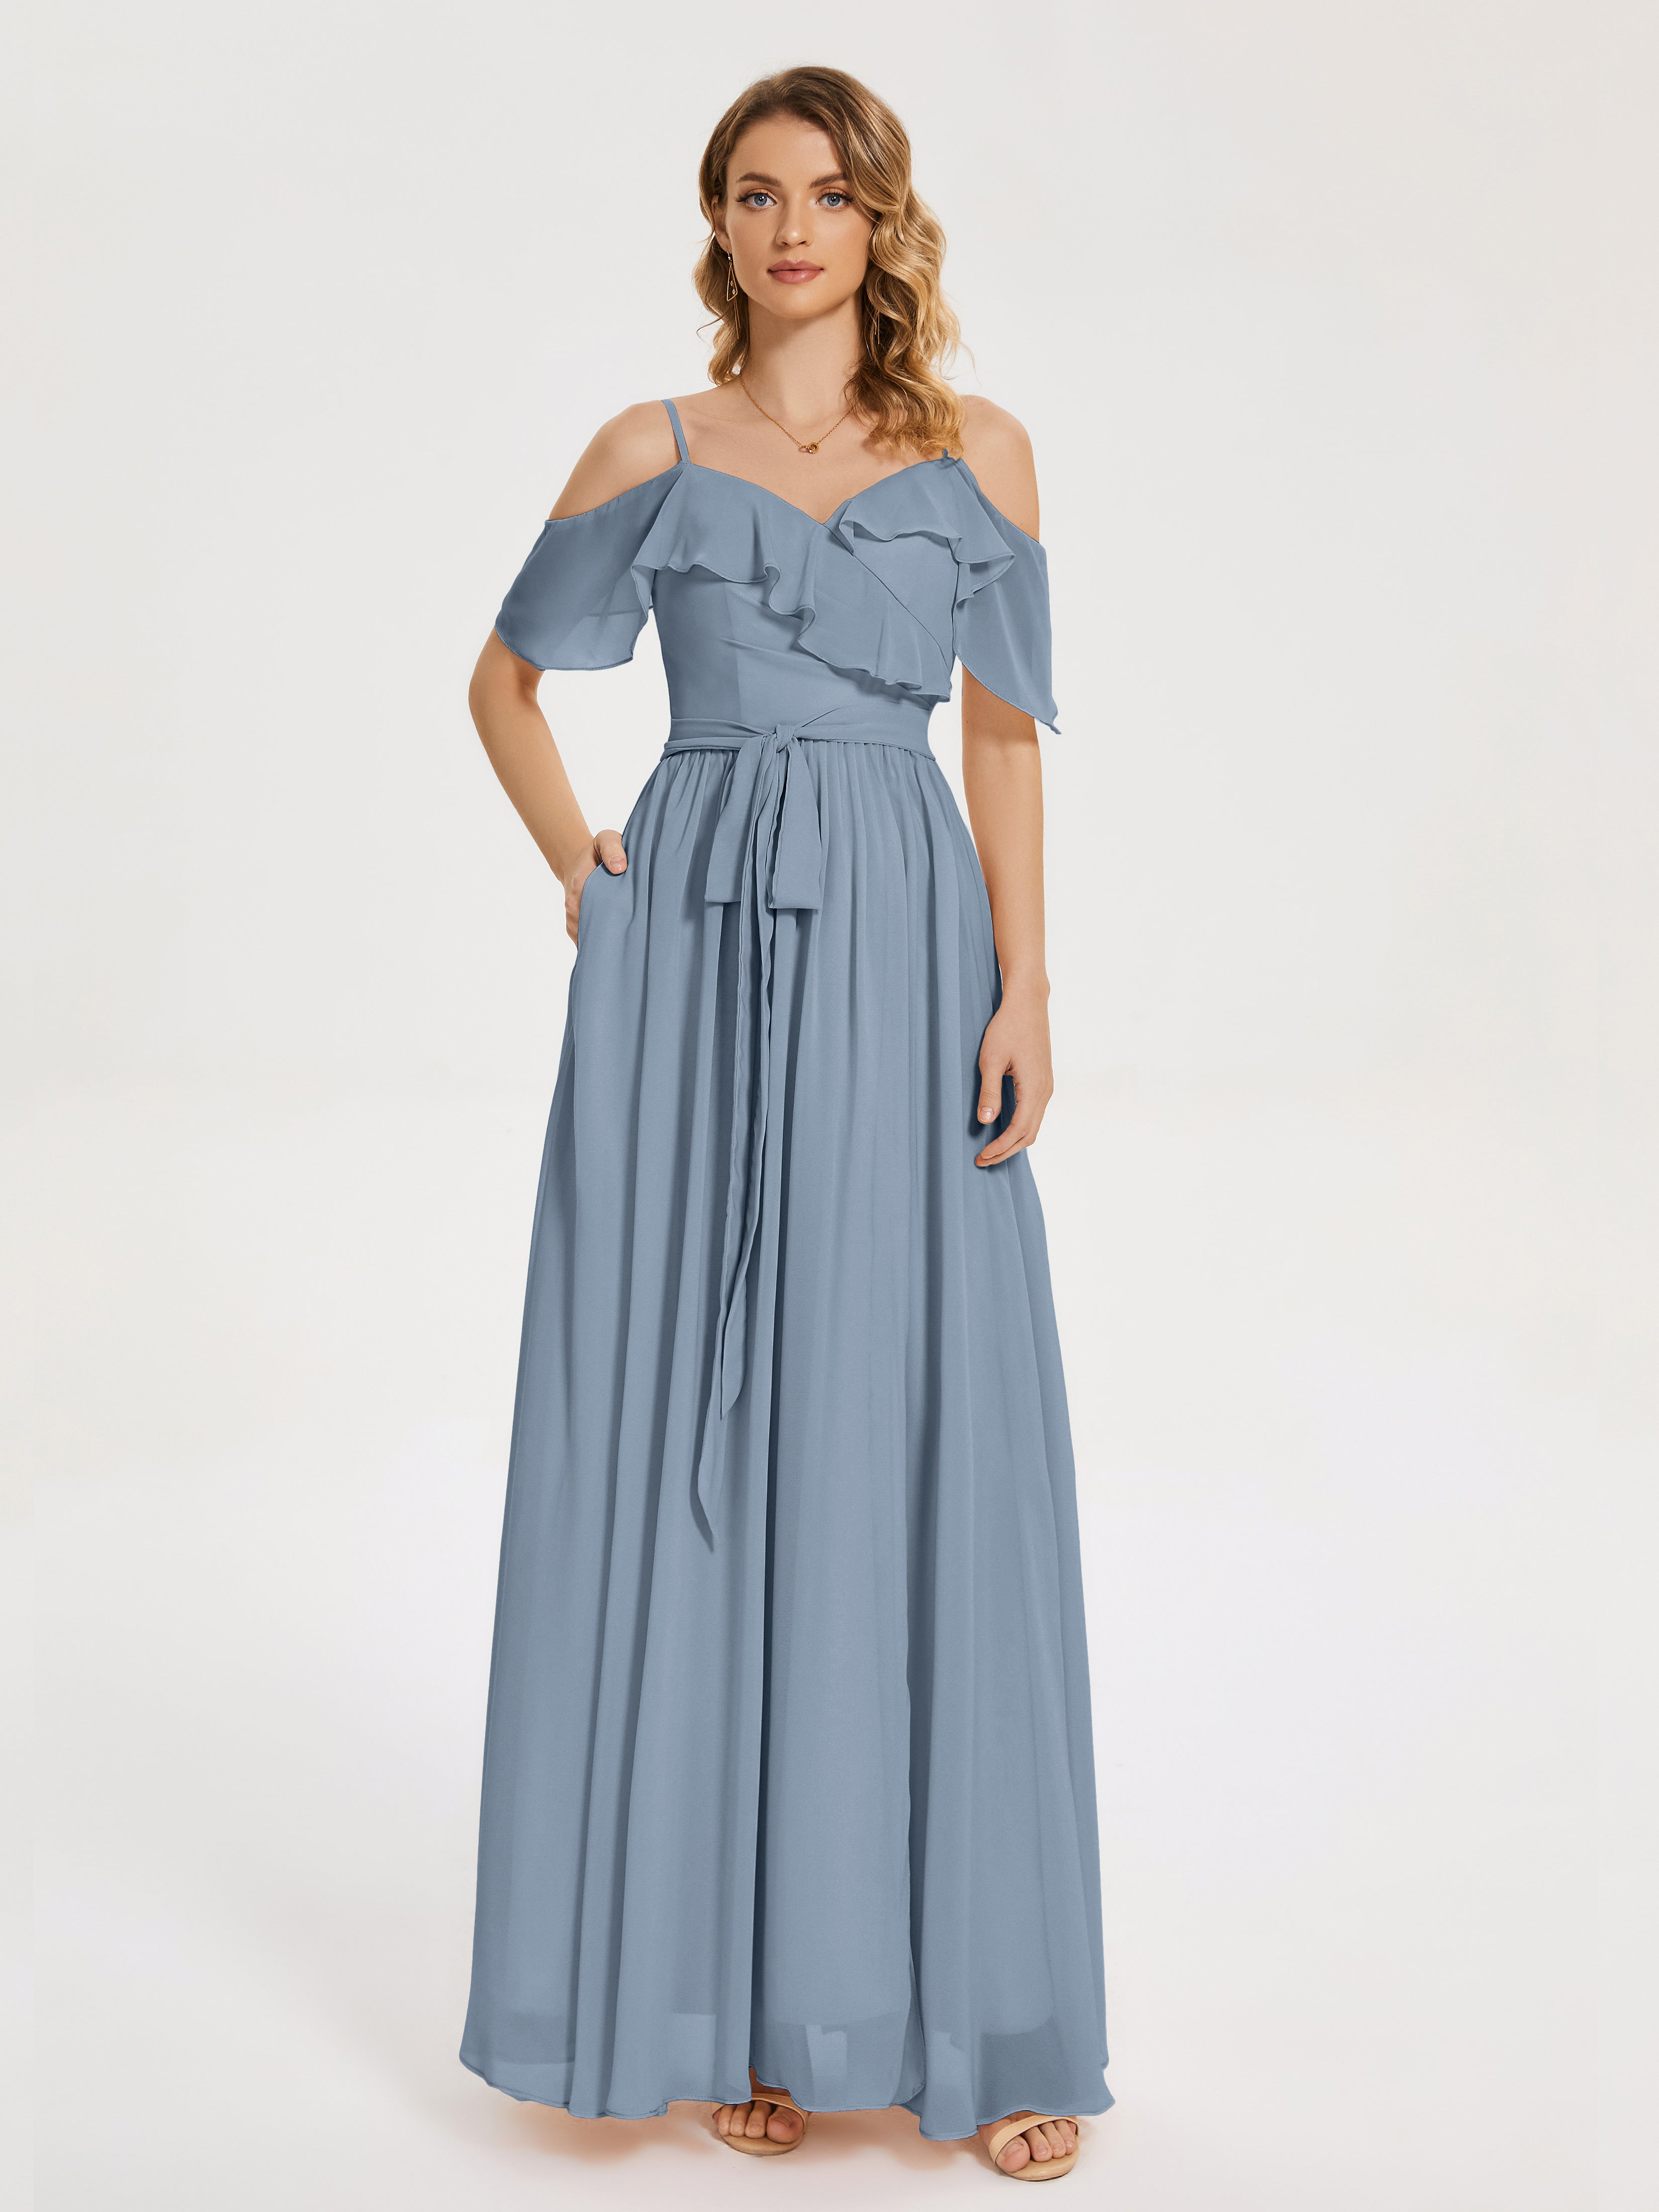 From $89 Affordable Dusty Blue Bridesmaid Dresses | Cicinia